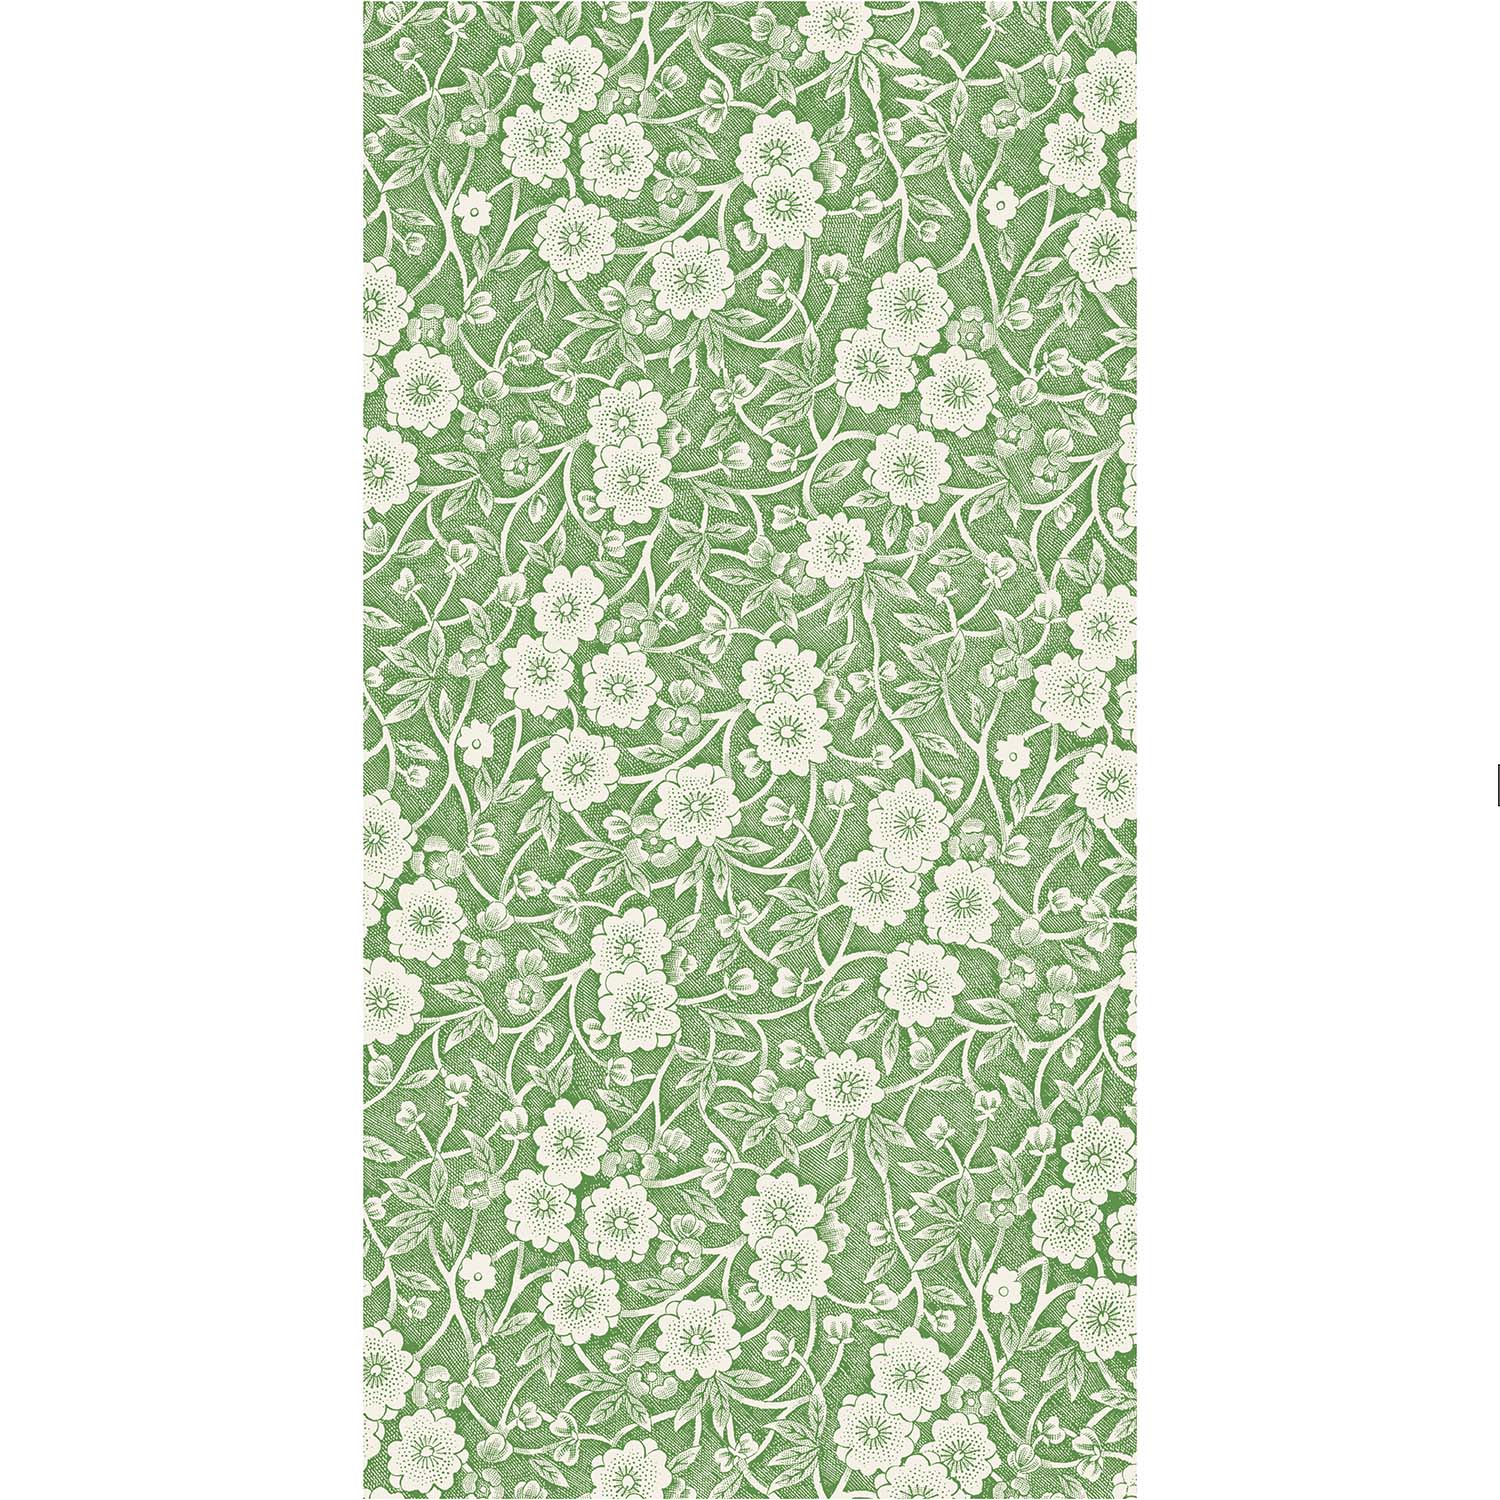 A rectangle guest napkin featuring a dense pattern of white flowers, stems and leaves on a green background.